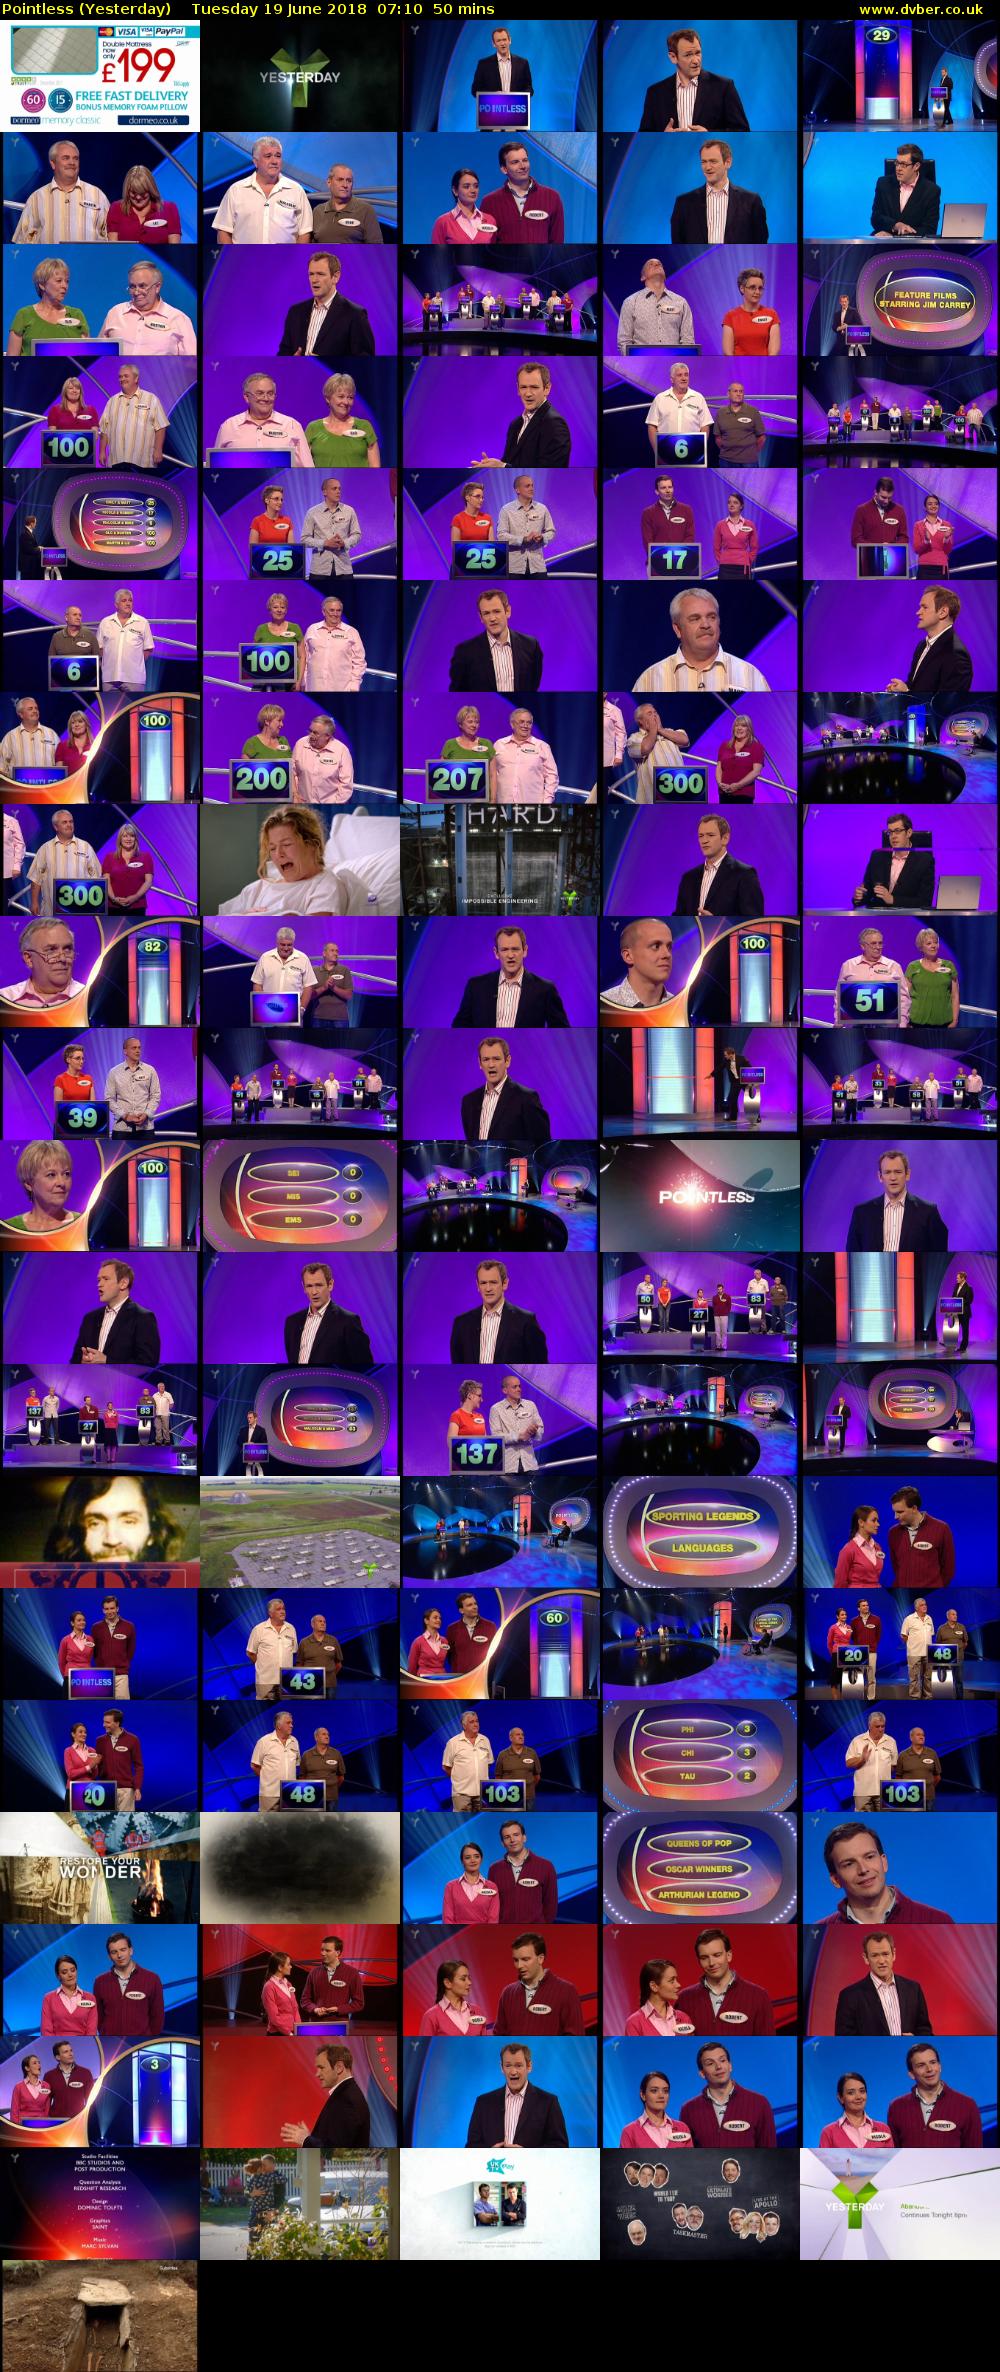 Pointless (Yesterday) Tuesday 19 June 2018 07:10 - 08:00